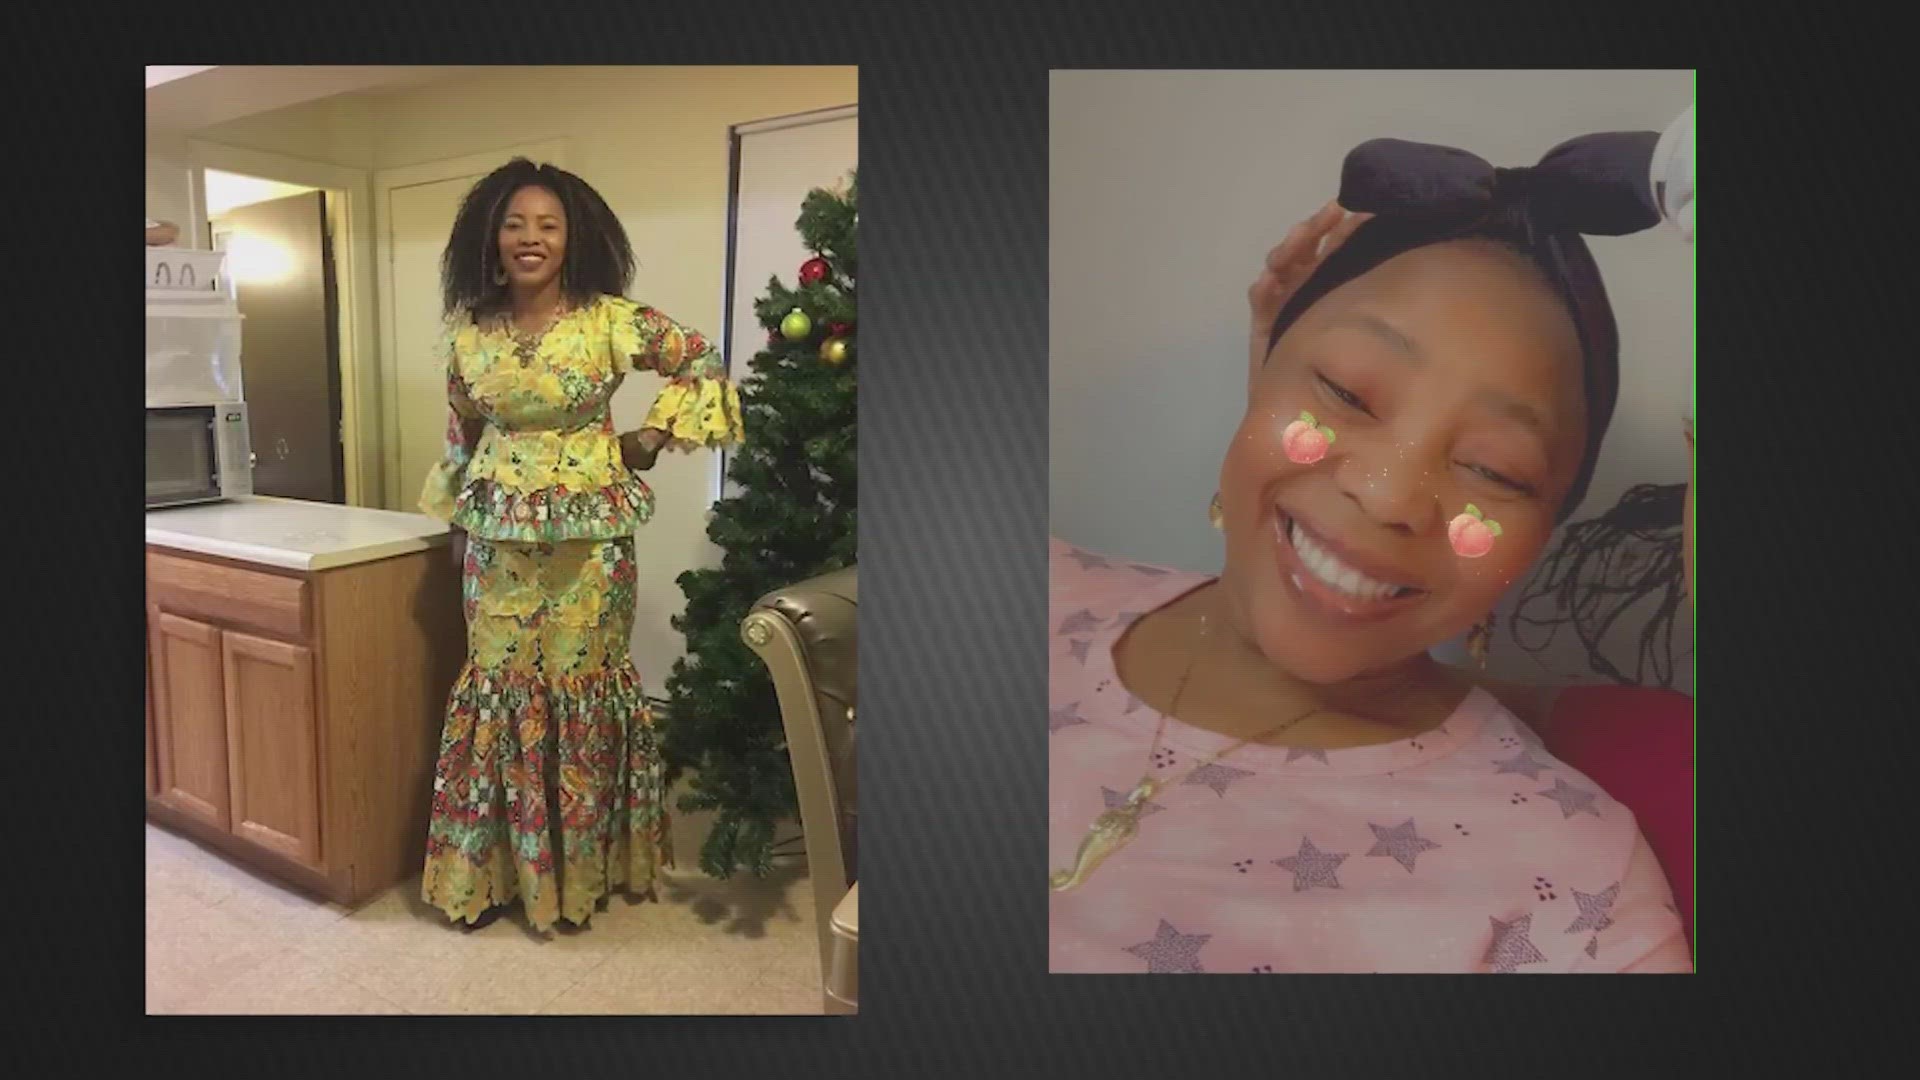 Mbiya Lutumba was hit and left for dead in SODO on March 16th near 4th and Lander. Her kids hope someone comes forward with information that'll lead to an arrest.